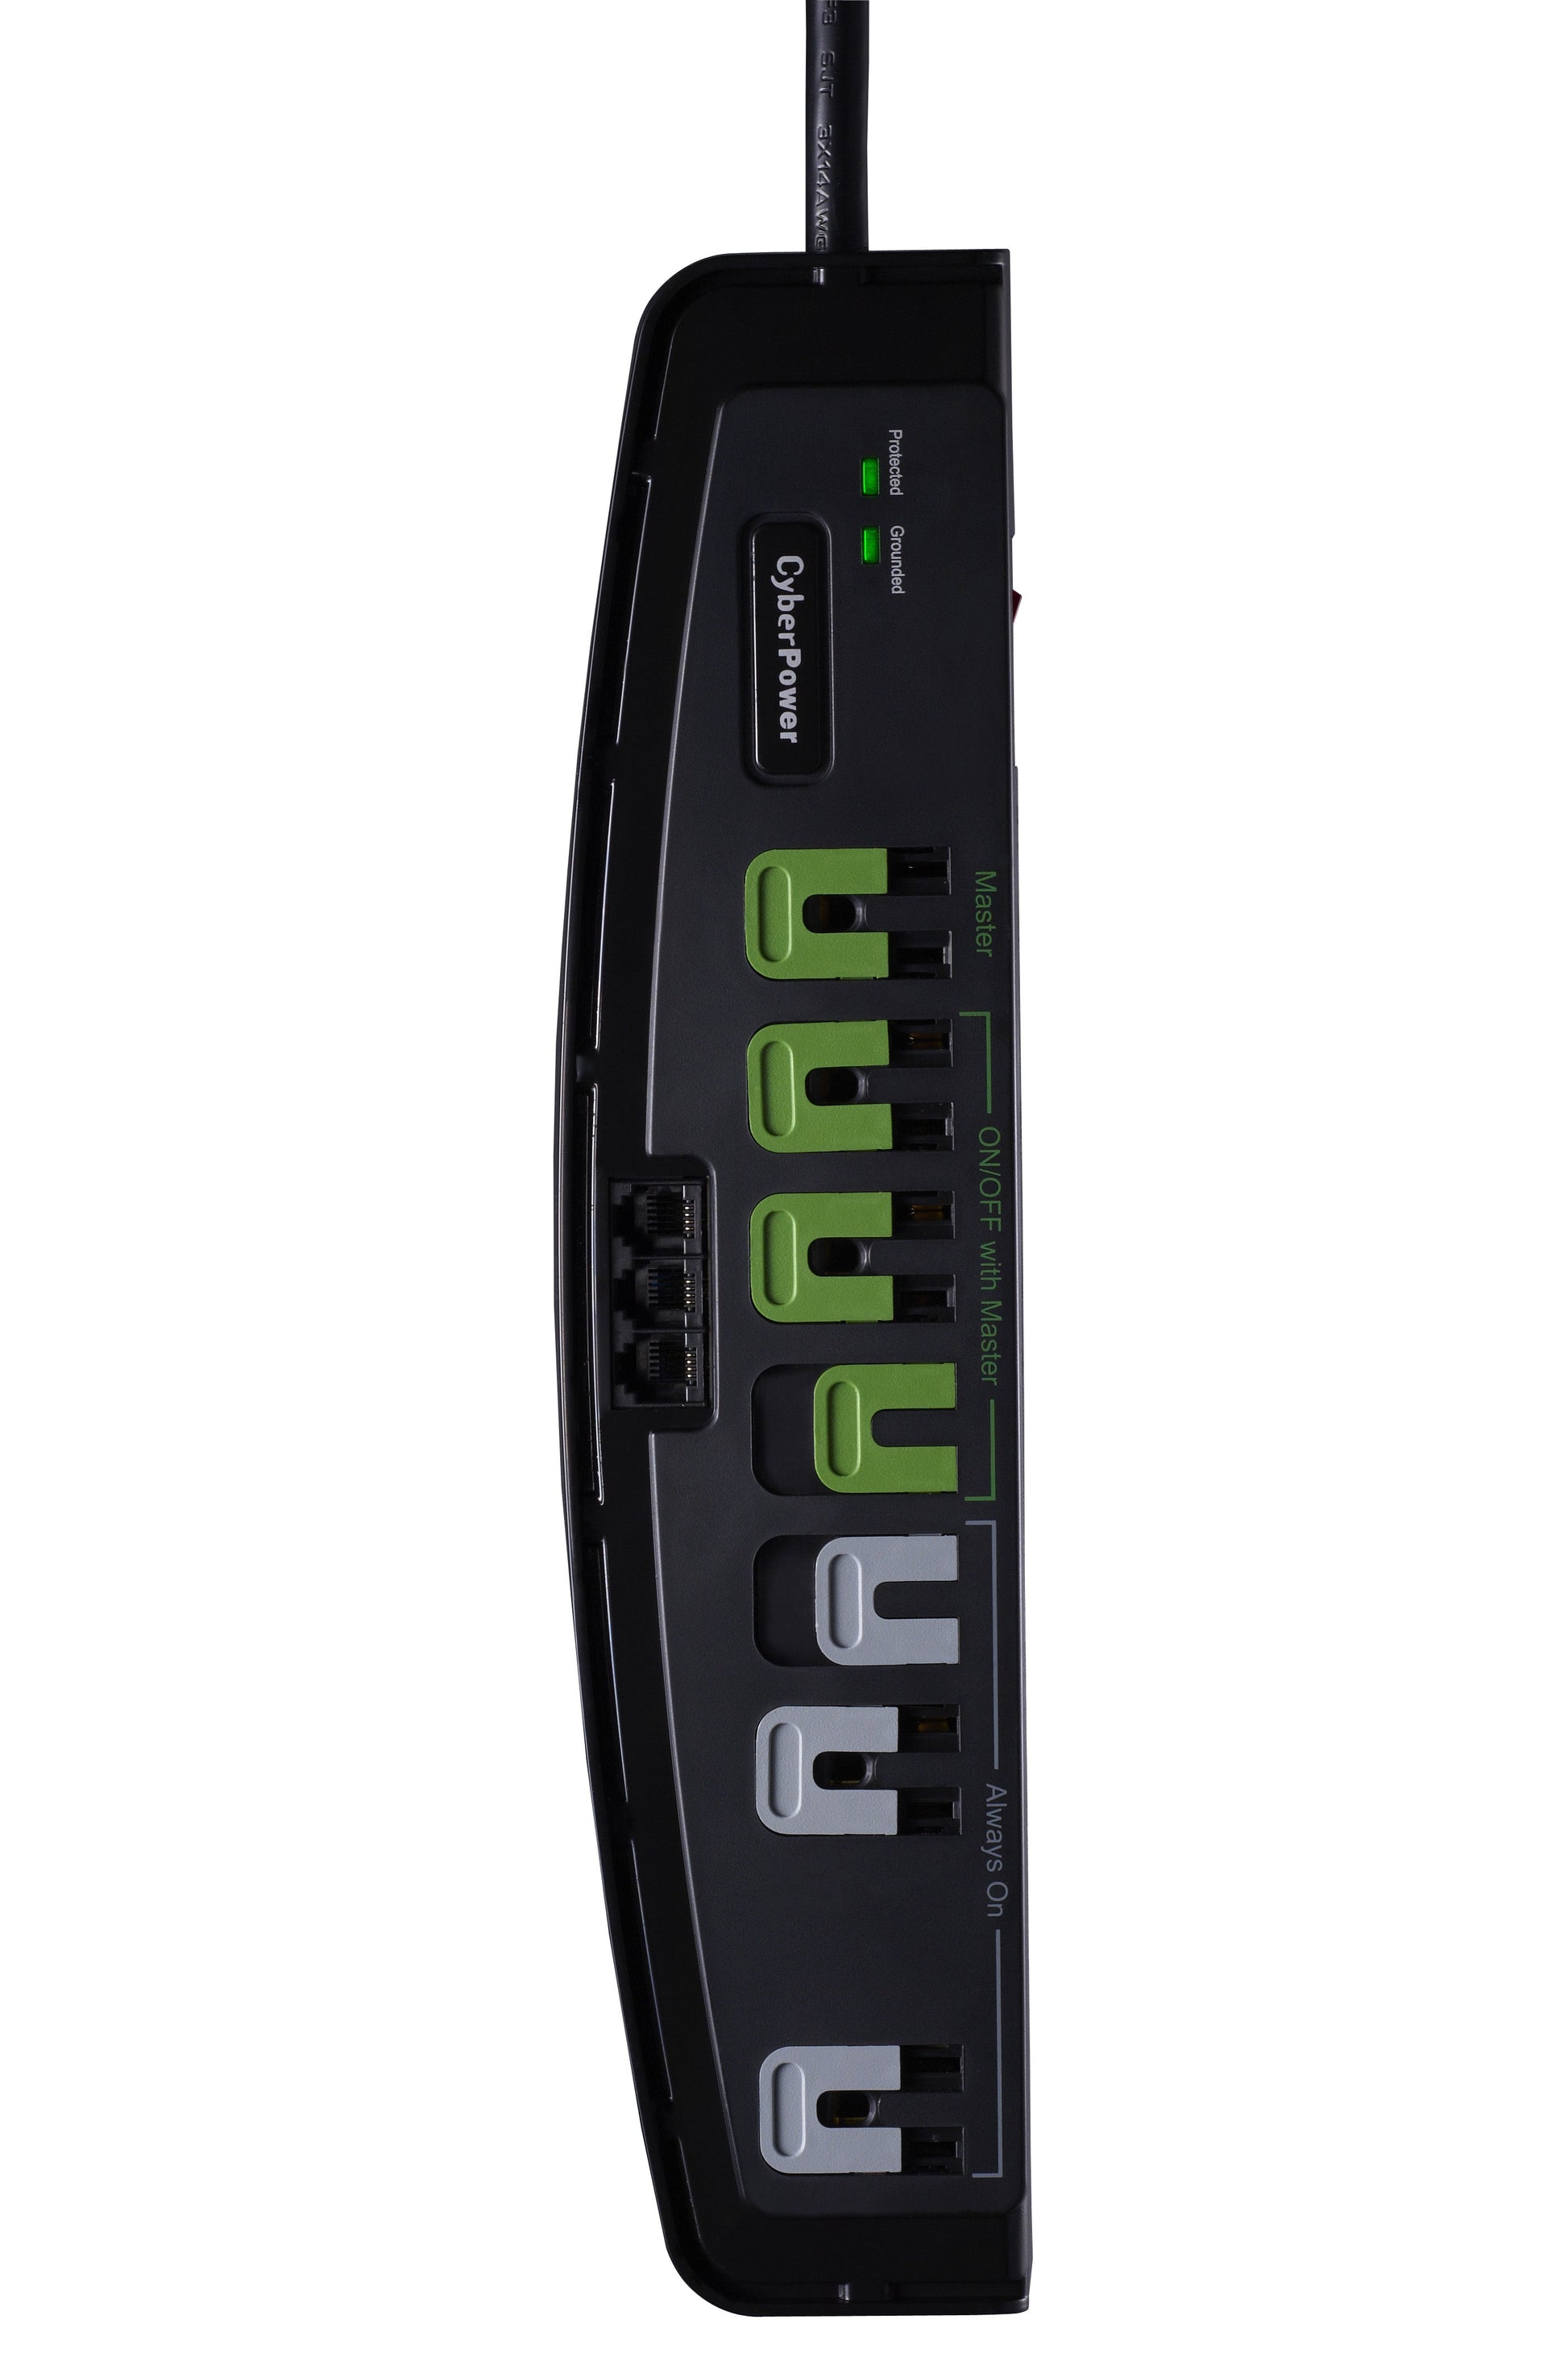 Cyberpower Csp706Tg Surge Protector Black 7 Ac Outlet(S) 125 V 1.8 M